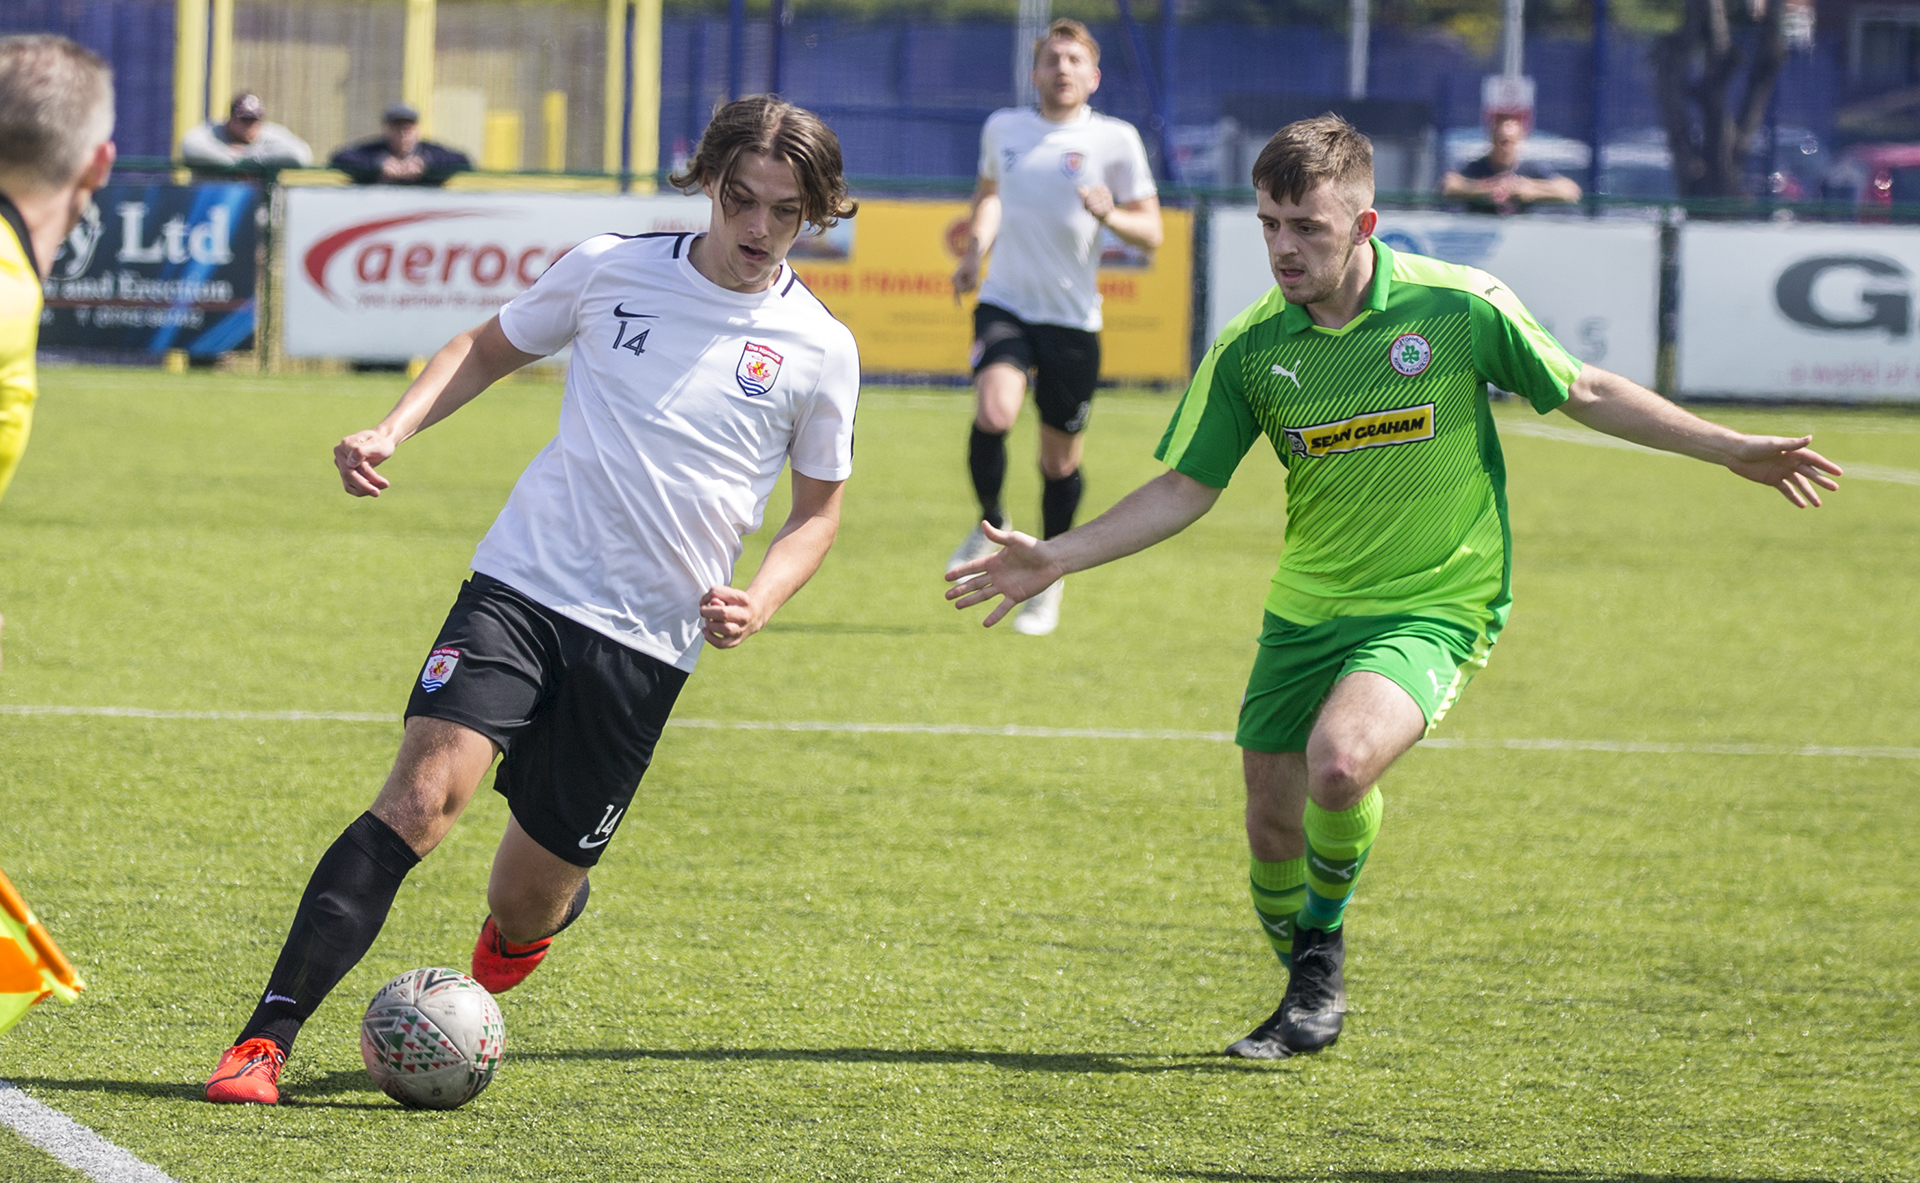 Conor Harwood impressed during his substitute appearance | © NCM Media